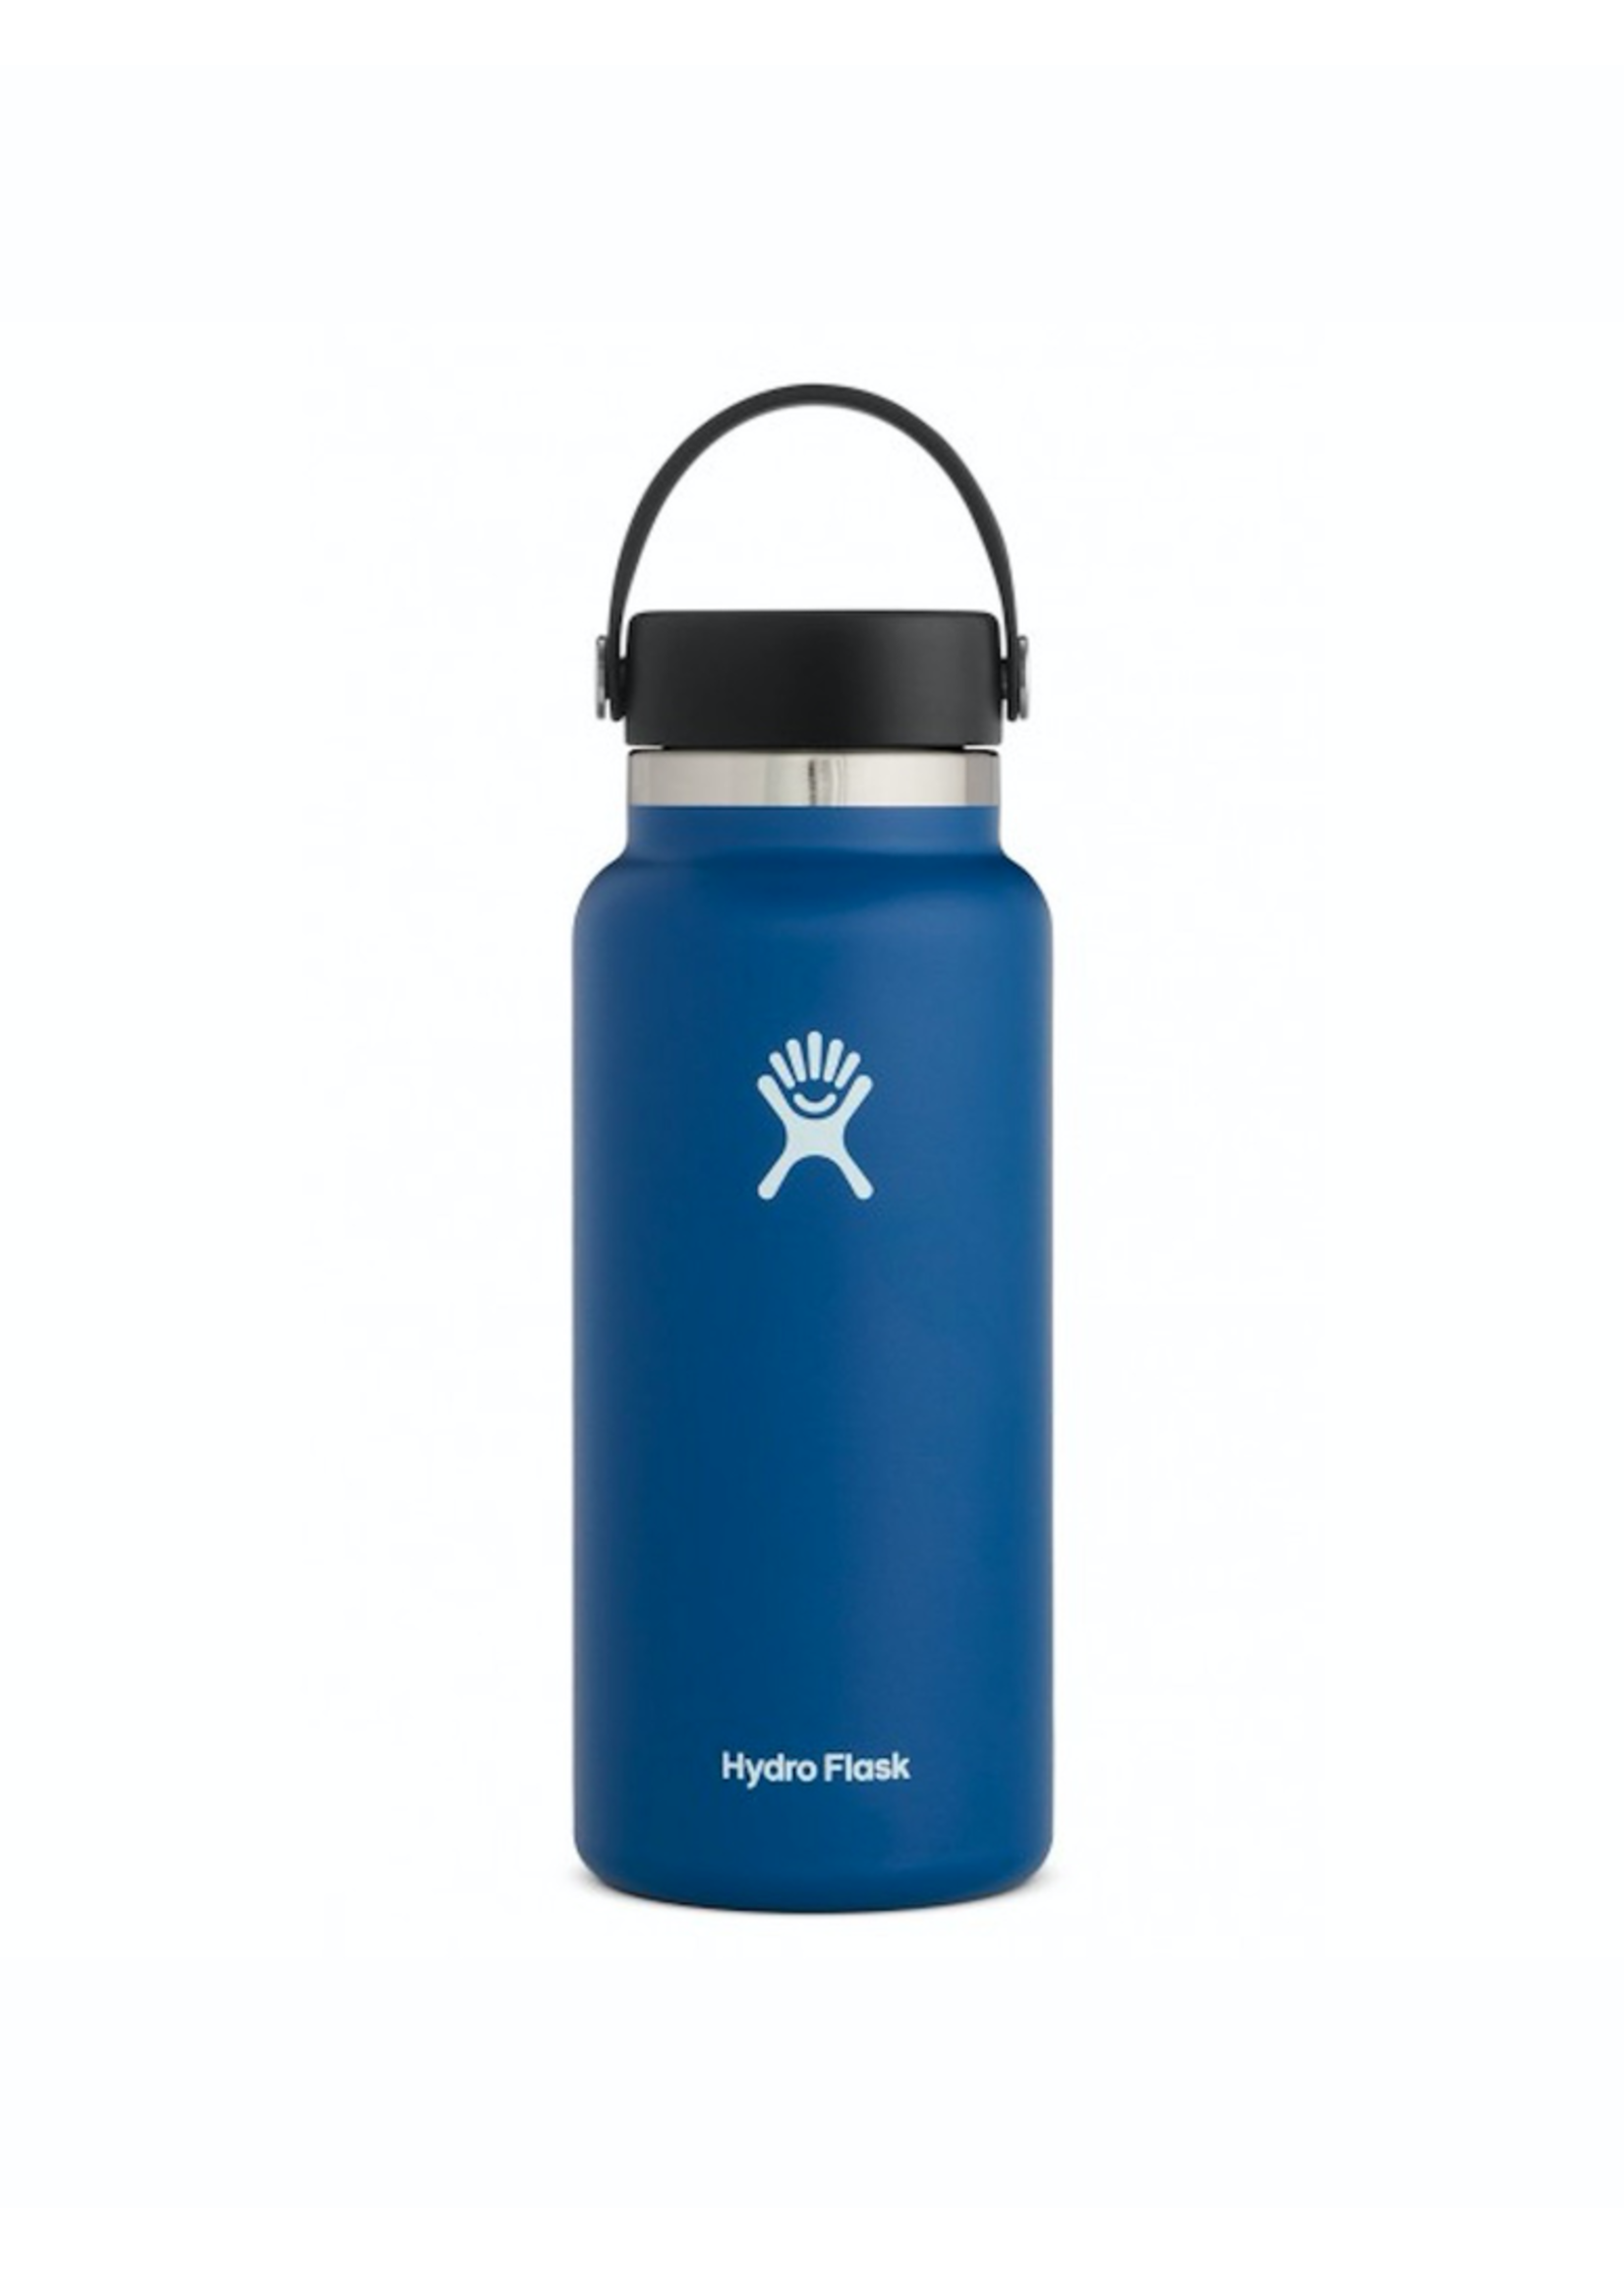 Hydro Flask Hydro Flask, 32 oz Wide Mouth 2.0  Flex Cap Insulated Stainless Steel Bottle in Cobalt